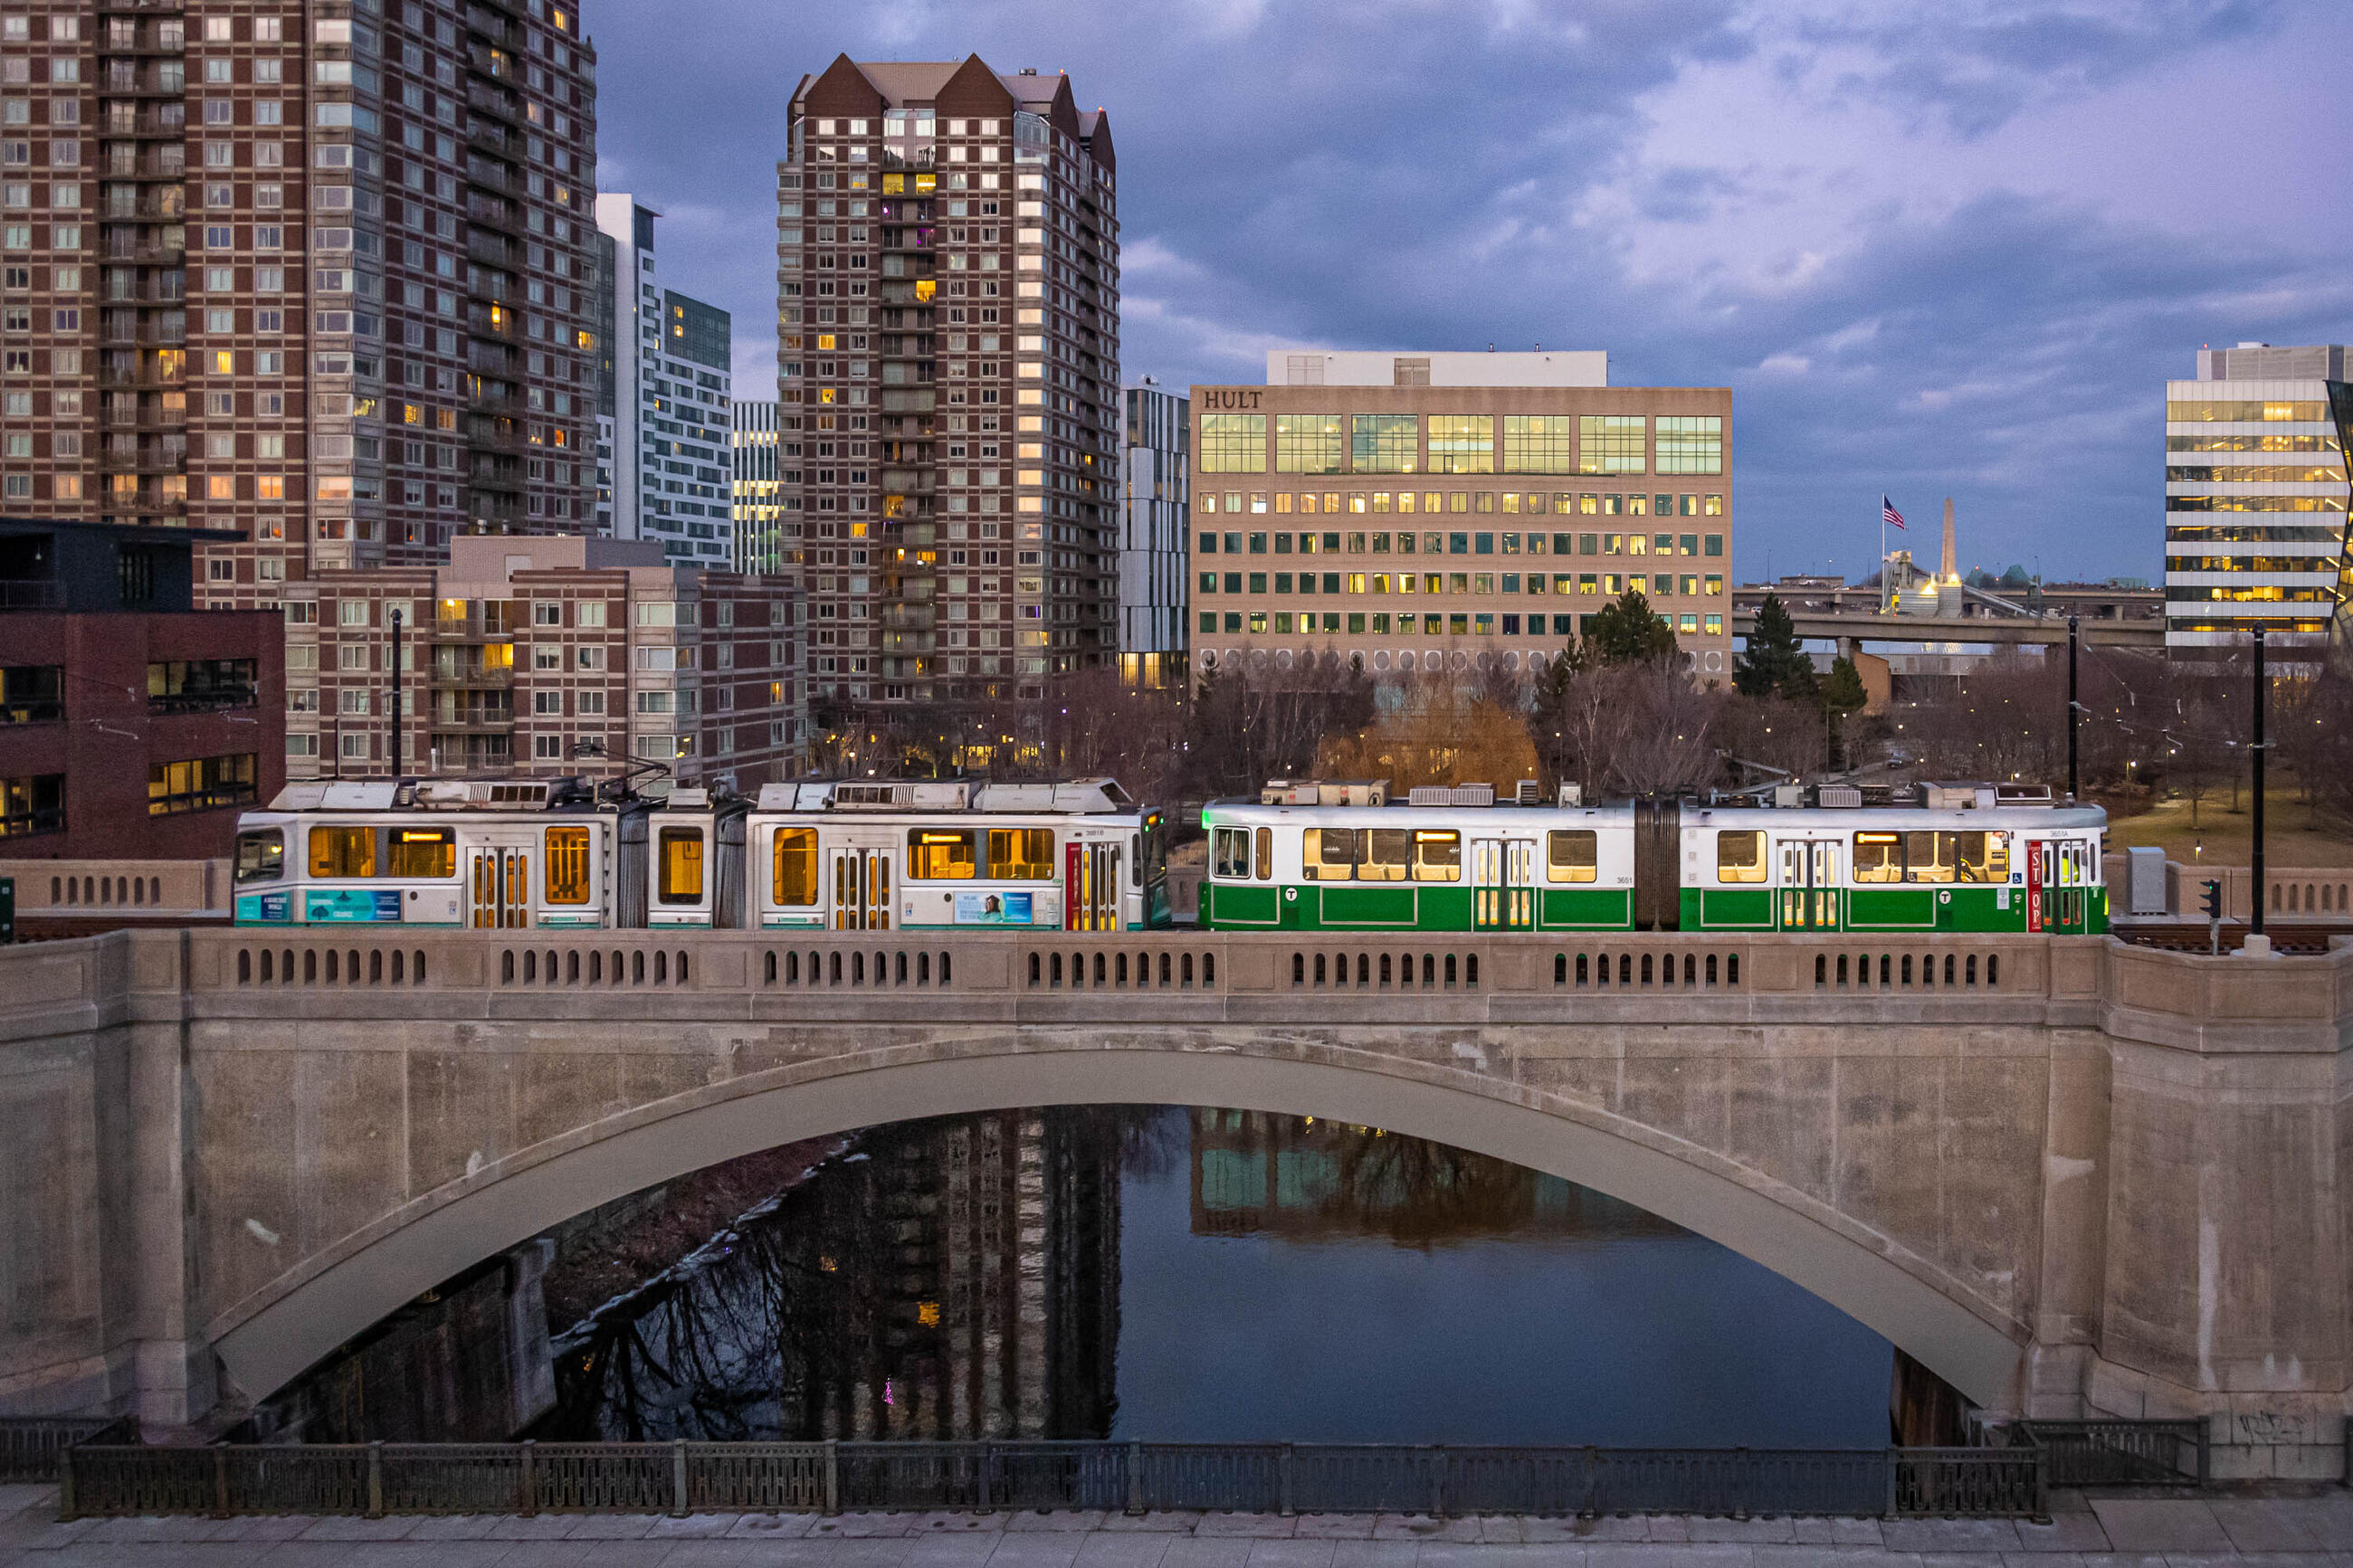 an empty green line test train on the lechmere viaduct, with a pretty purple sky as a backdrop